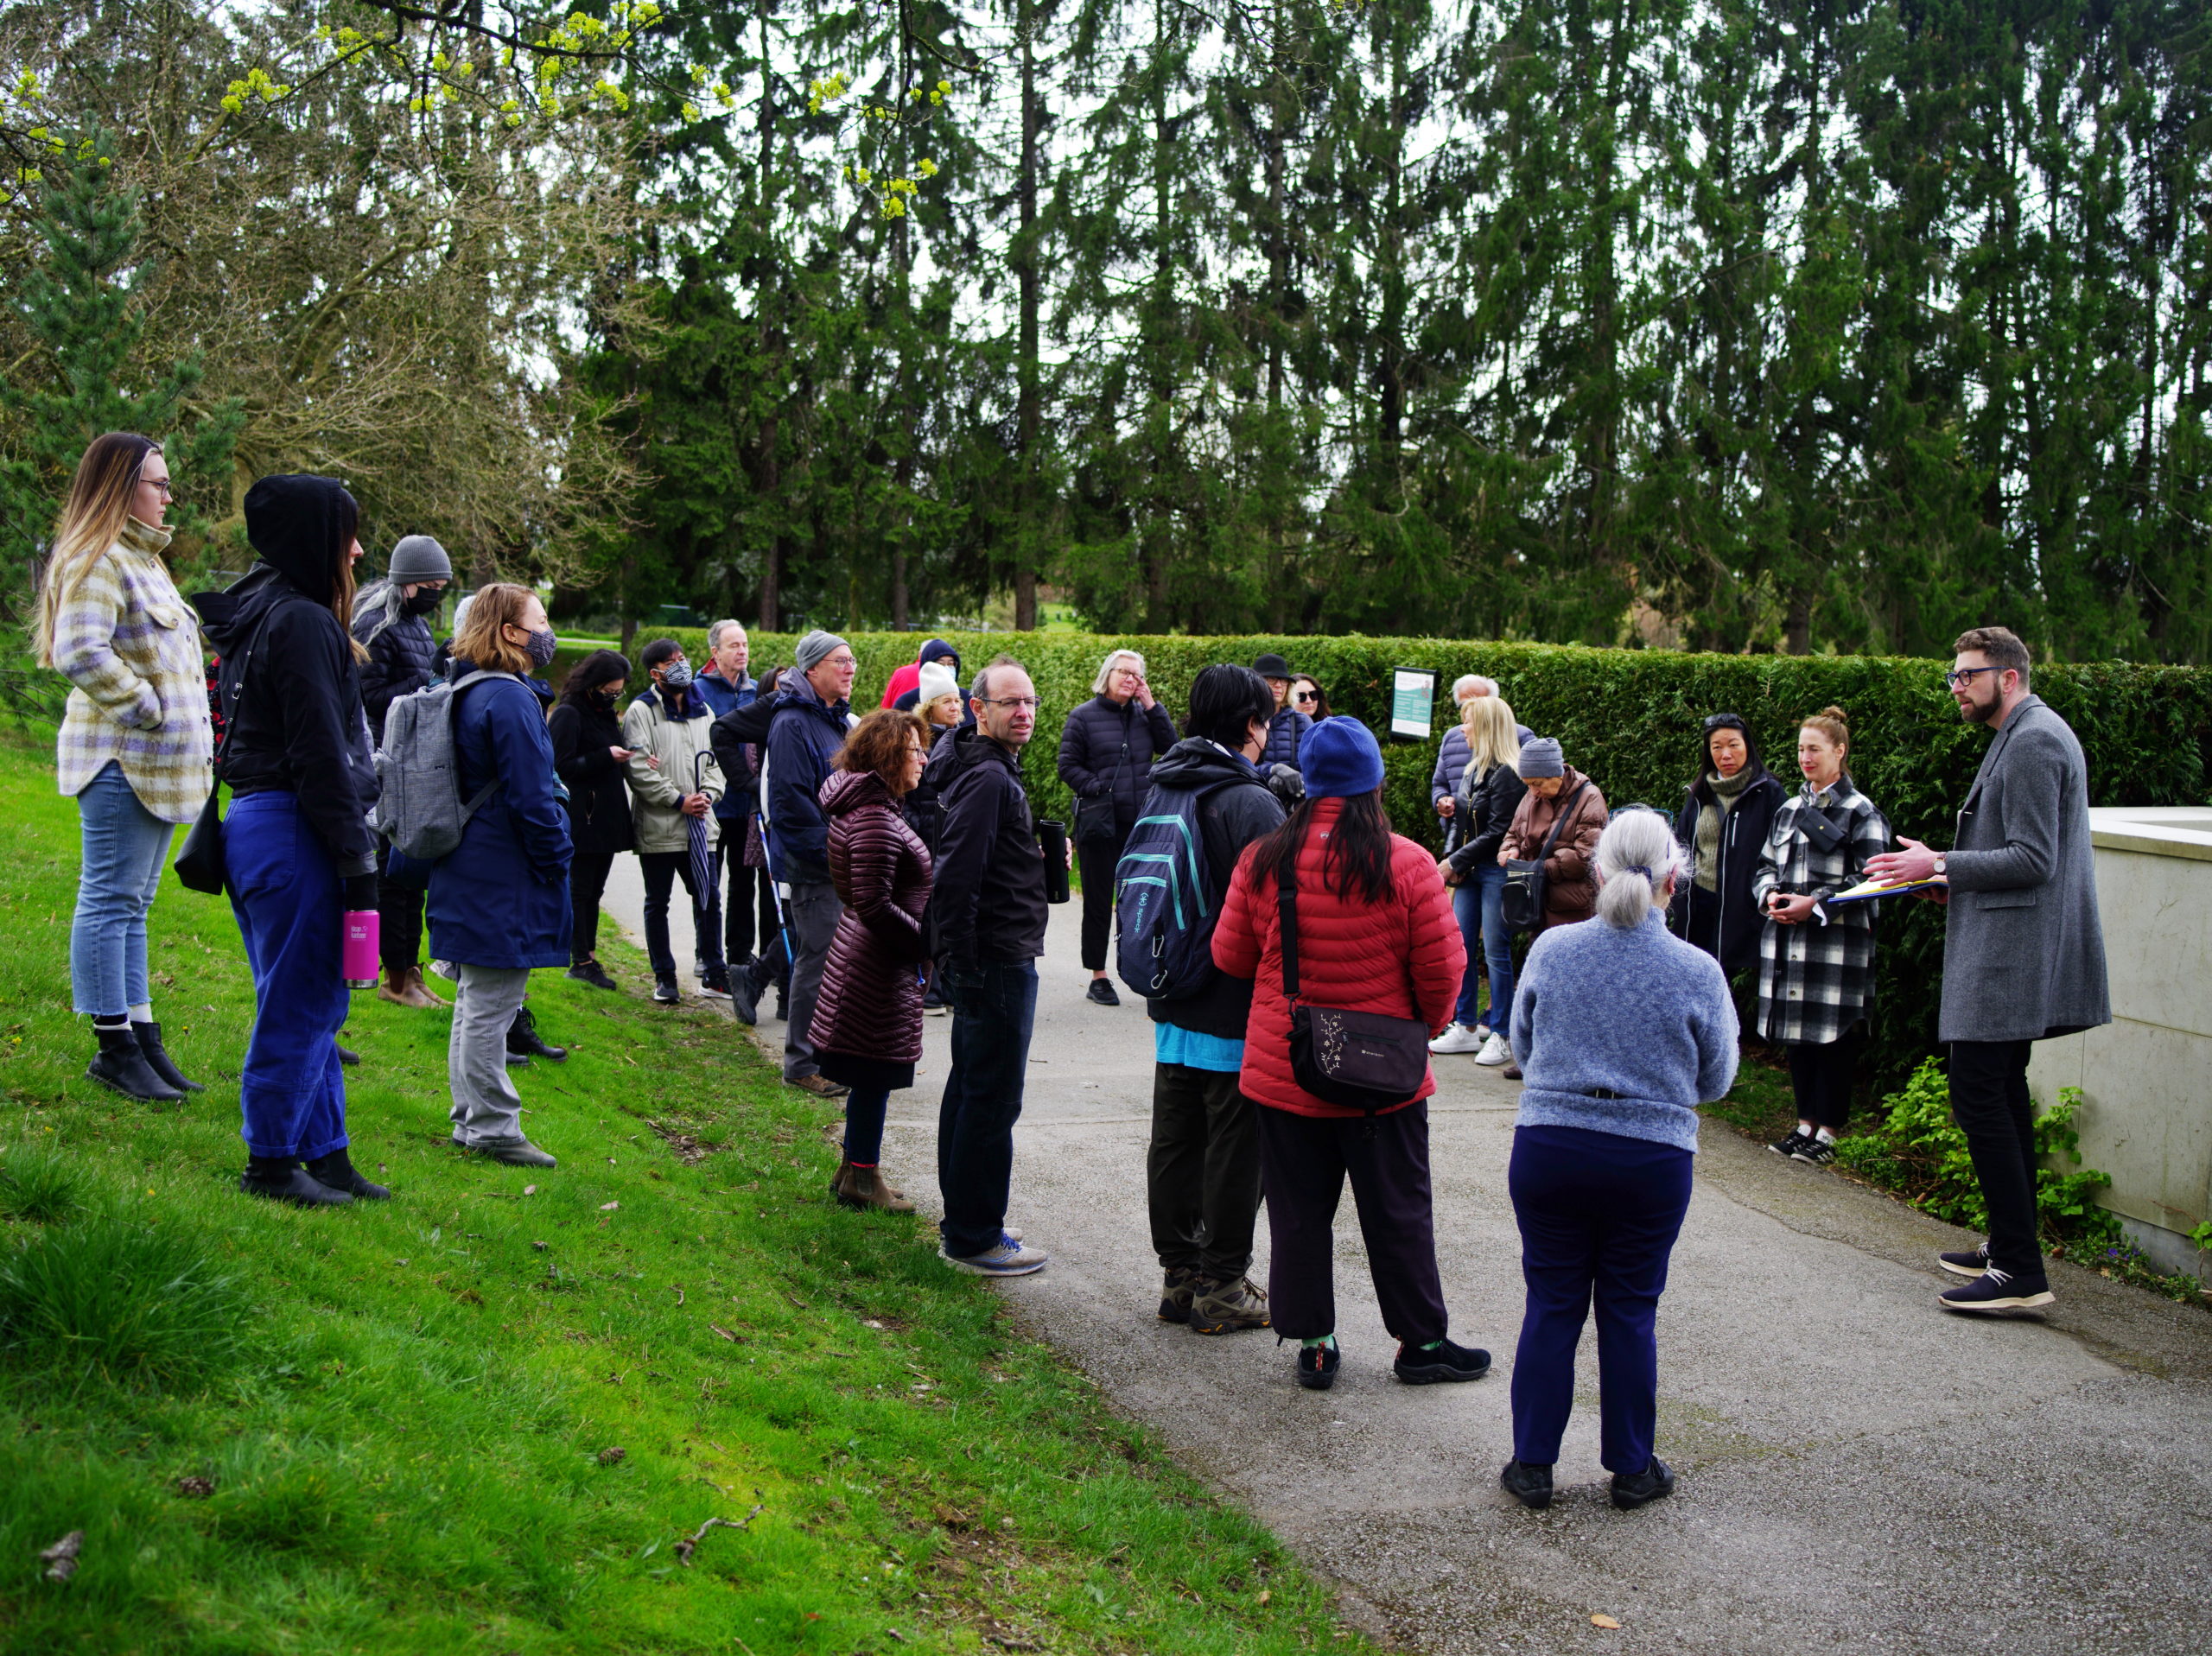 Image Description: Michael Schwartz welcomes a group of people to the Cross Cultural Walking Tours.The people face Michael, standing on a paved path and a grassy hill outside the Jewish Cemetery hedge line.